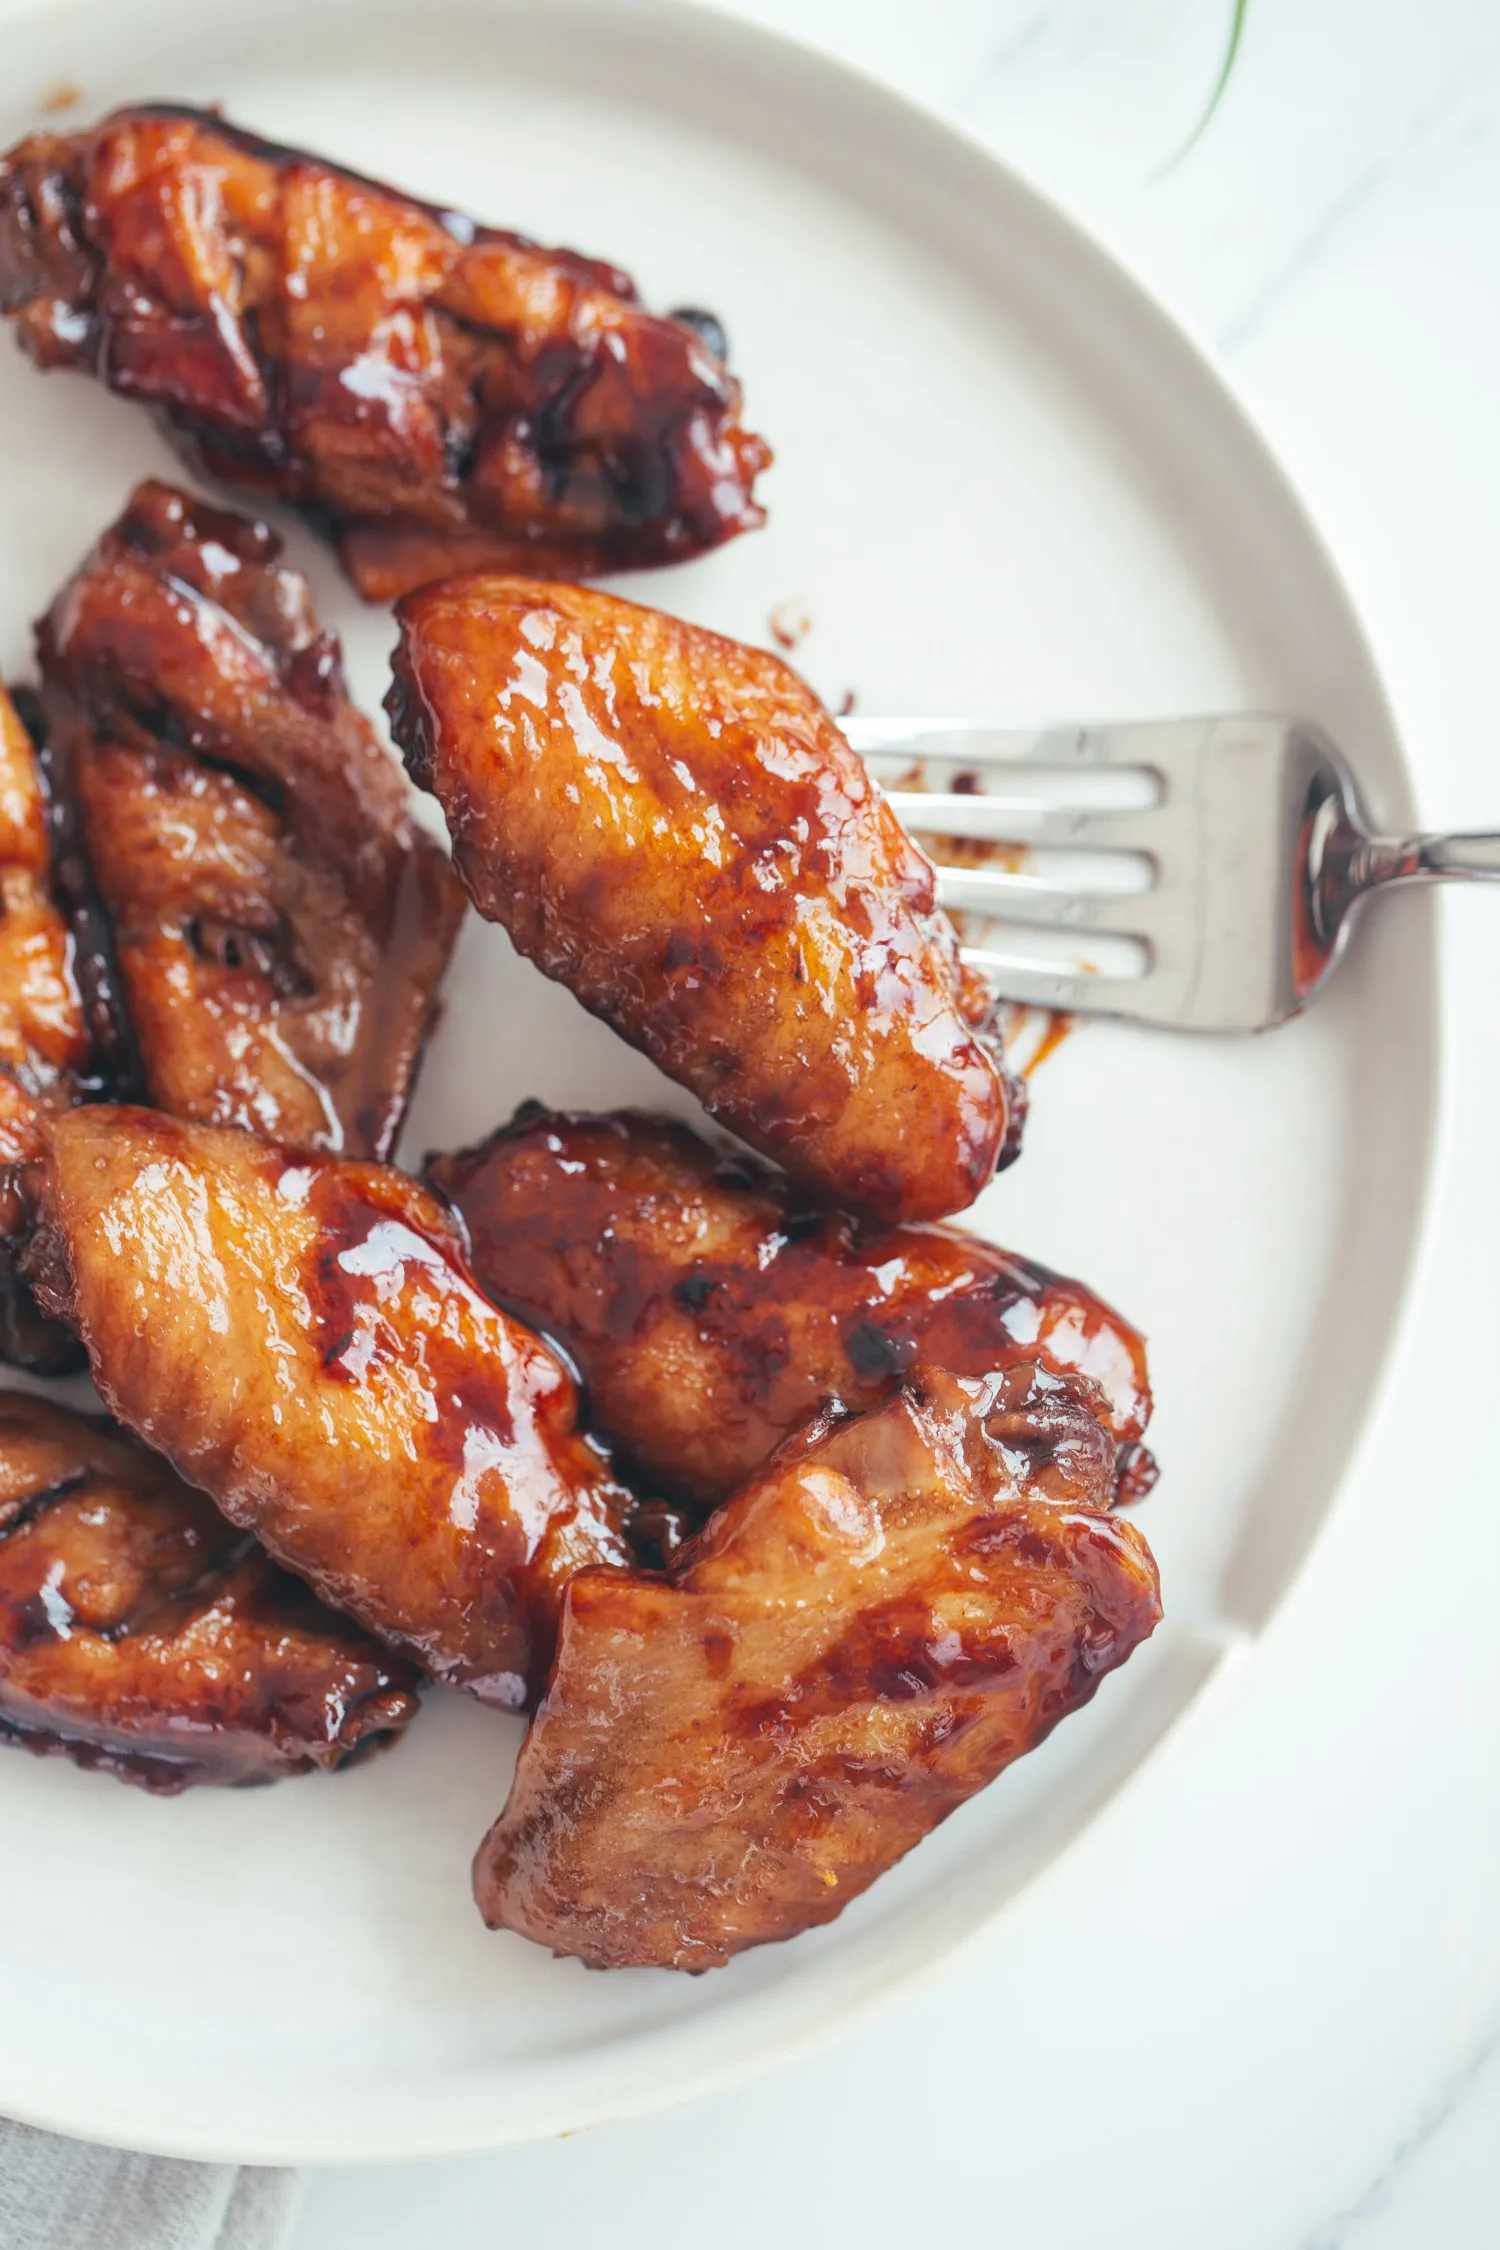 https://www.chinasichuanfood.com/coca-cola-chicken-wings/coca cola chicken wings